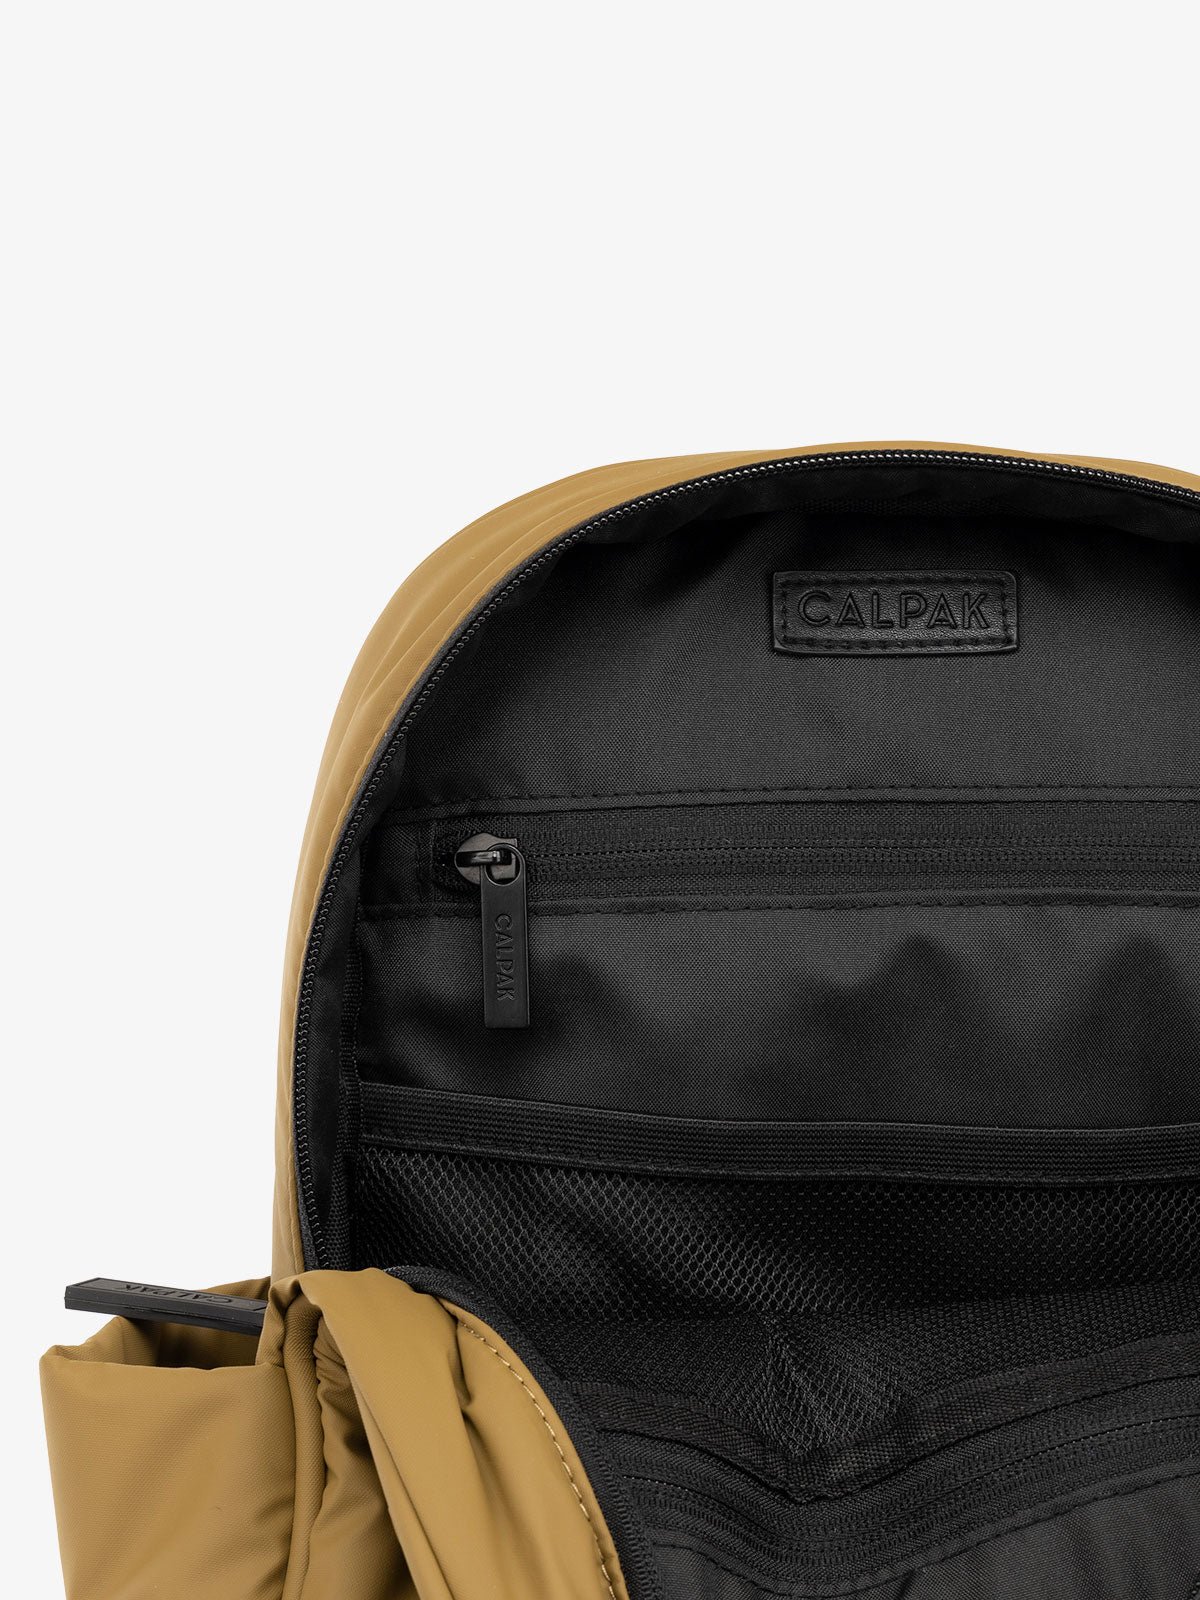 CALPAK Luka Mini travel Backpack with water resistant interior lining and multiple pockets in khaki